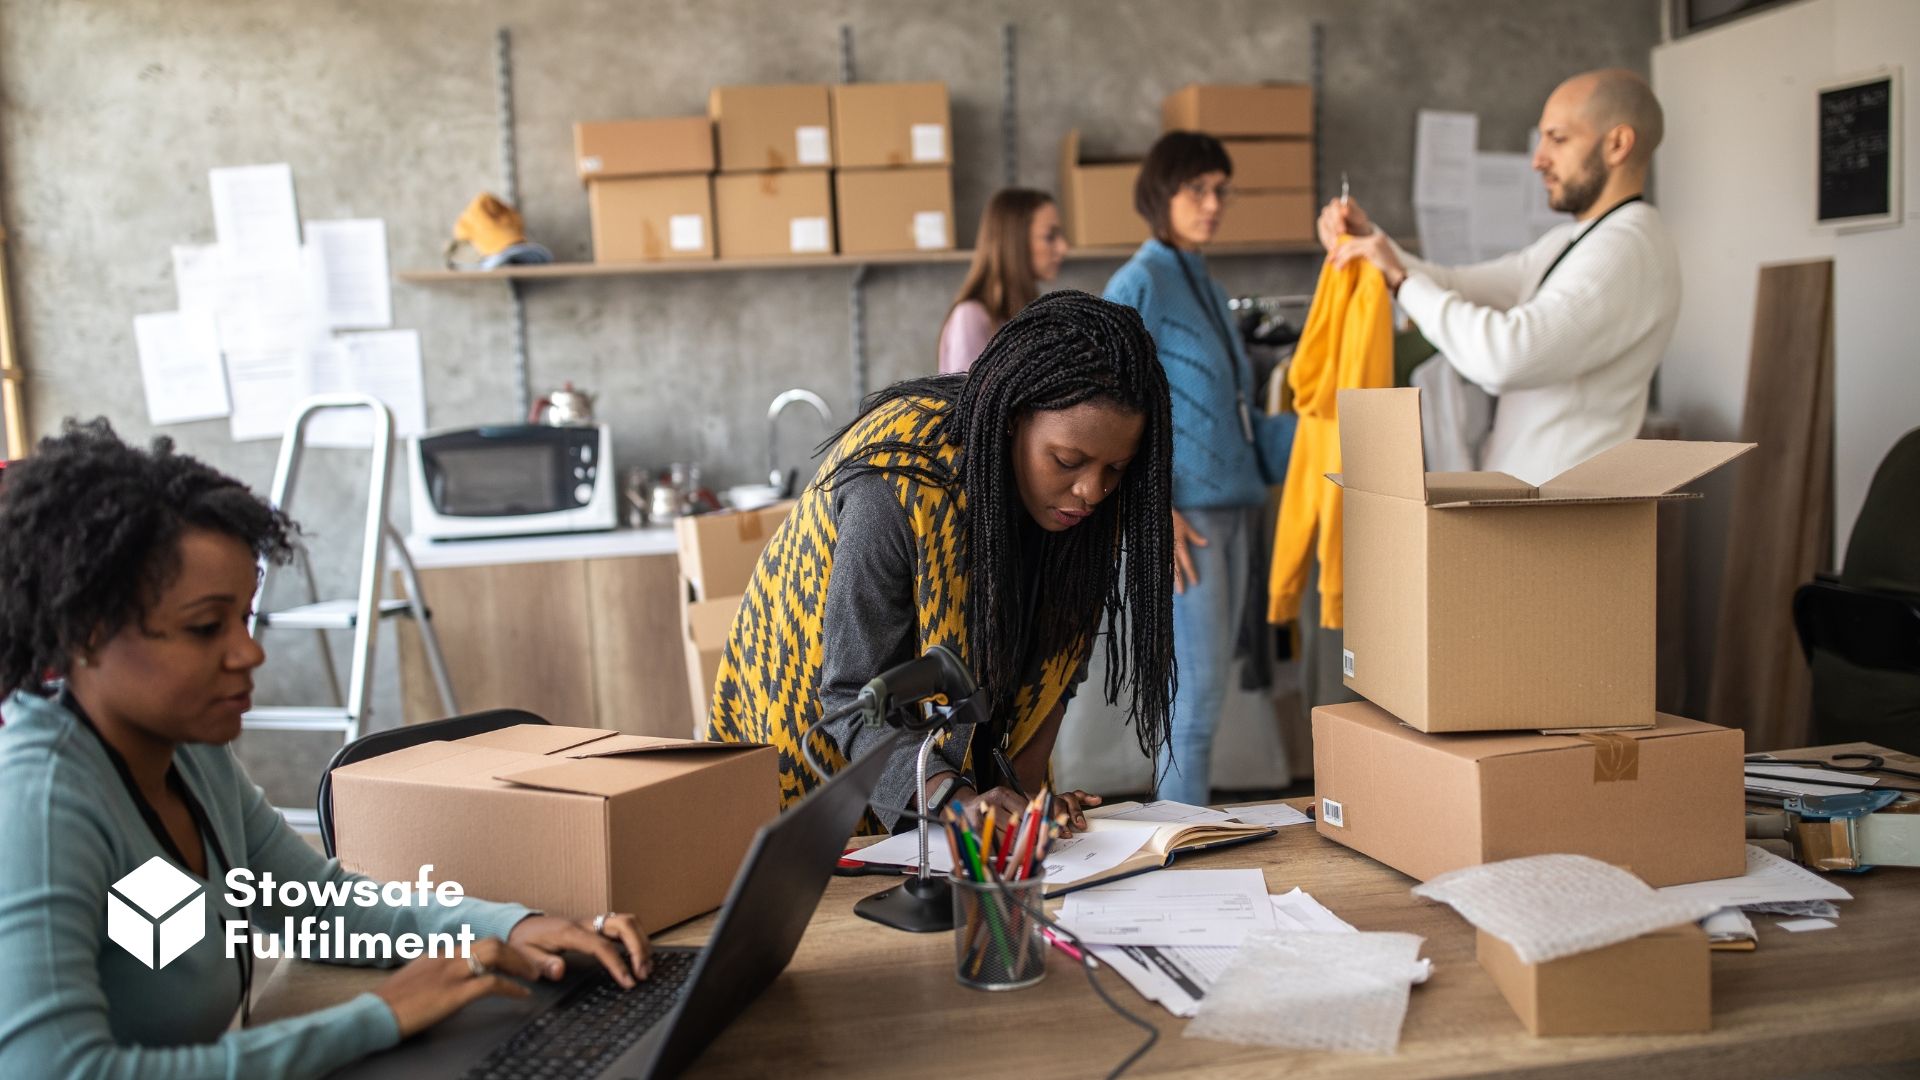 eCommerce is on the rise – and more and more retailers are shifting their operations online. Want to make the most of the move? Follow our 5 smart tips.